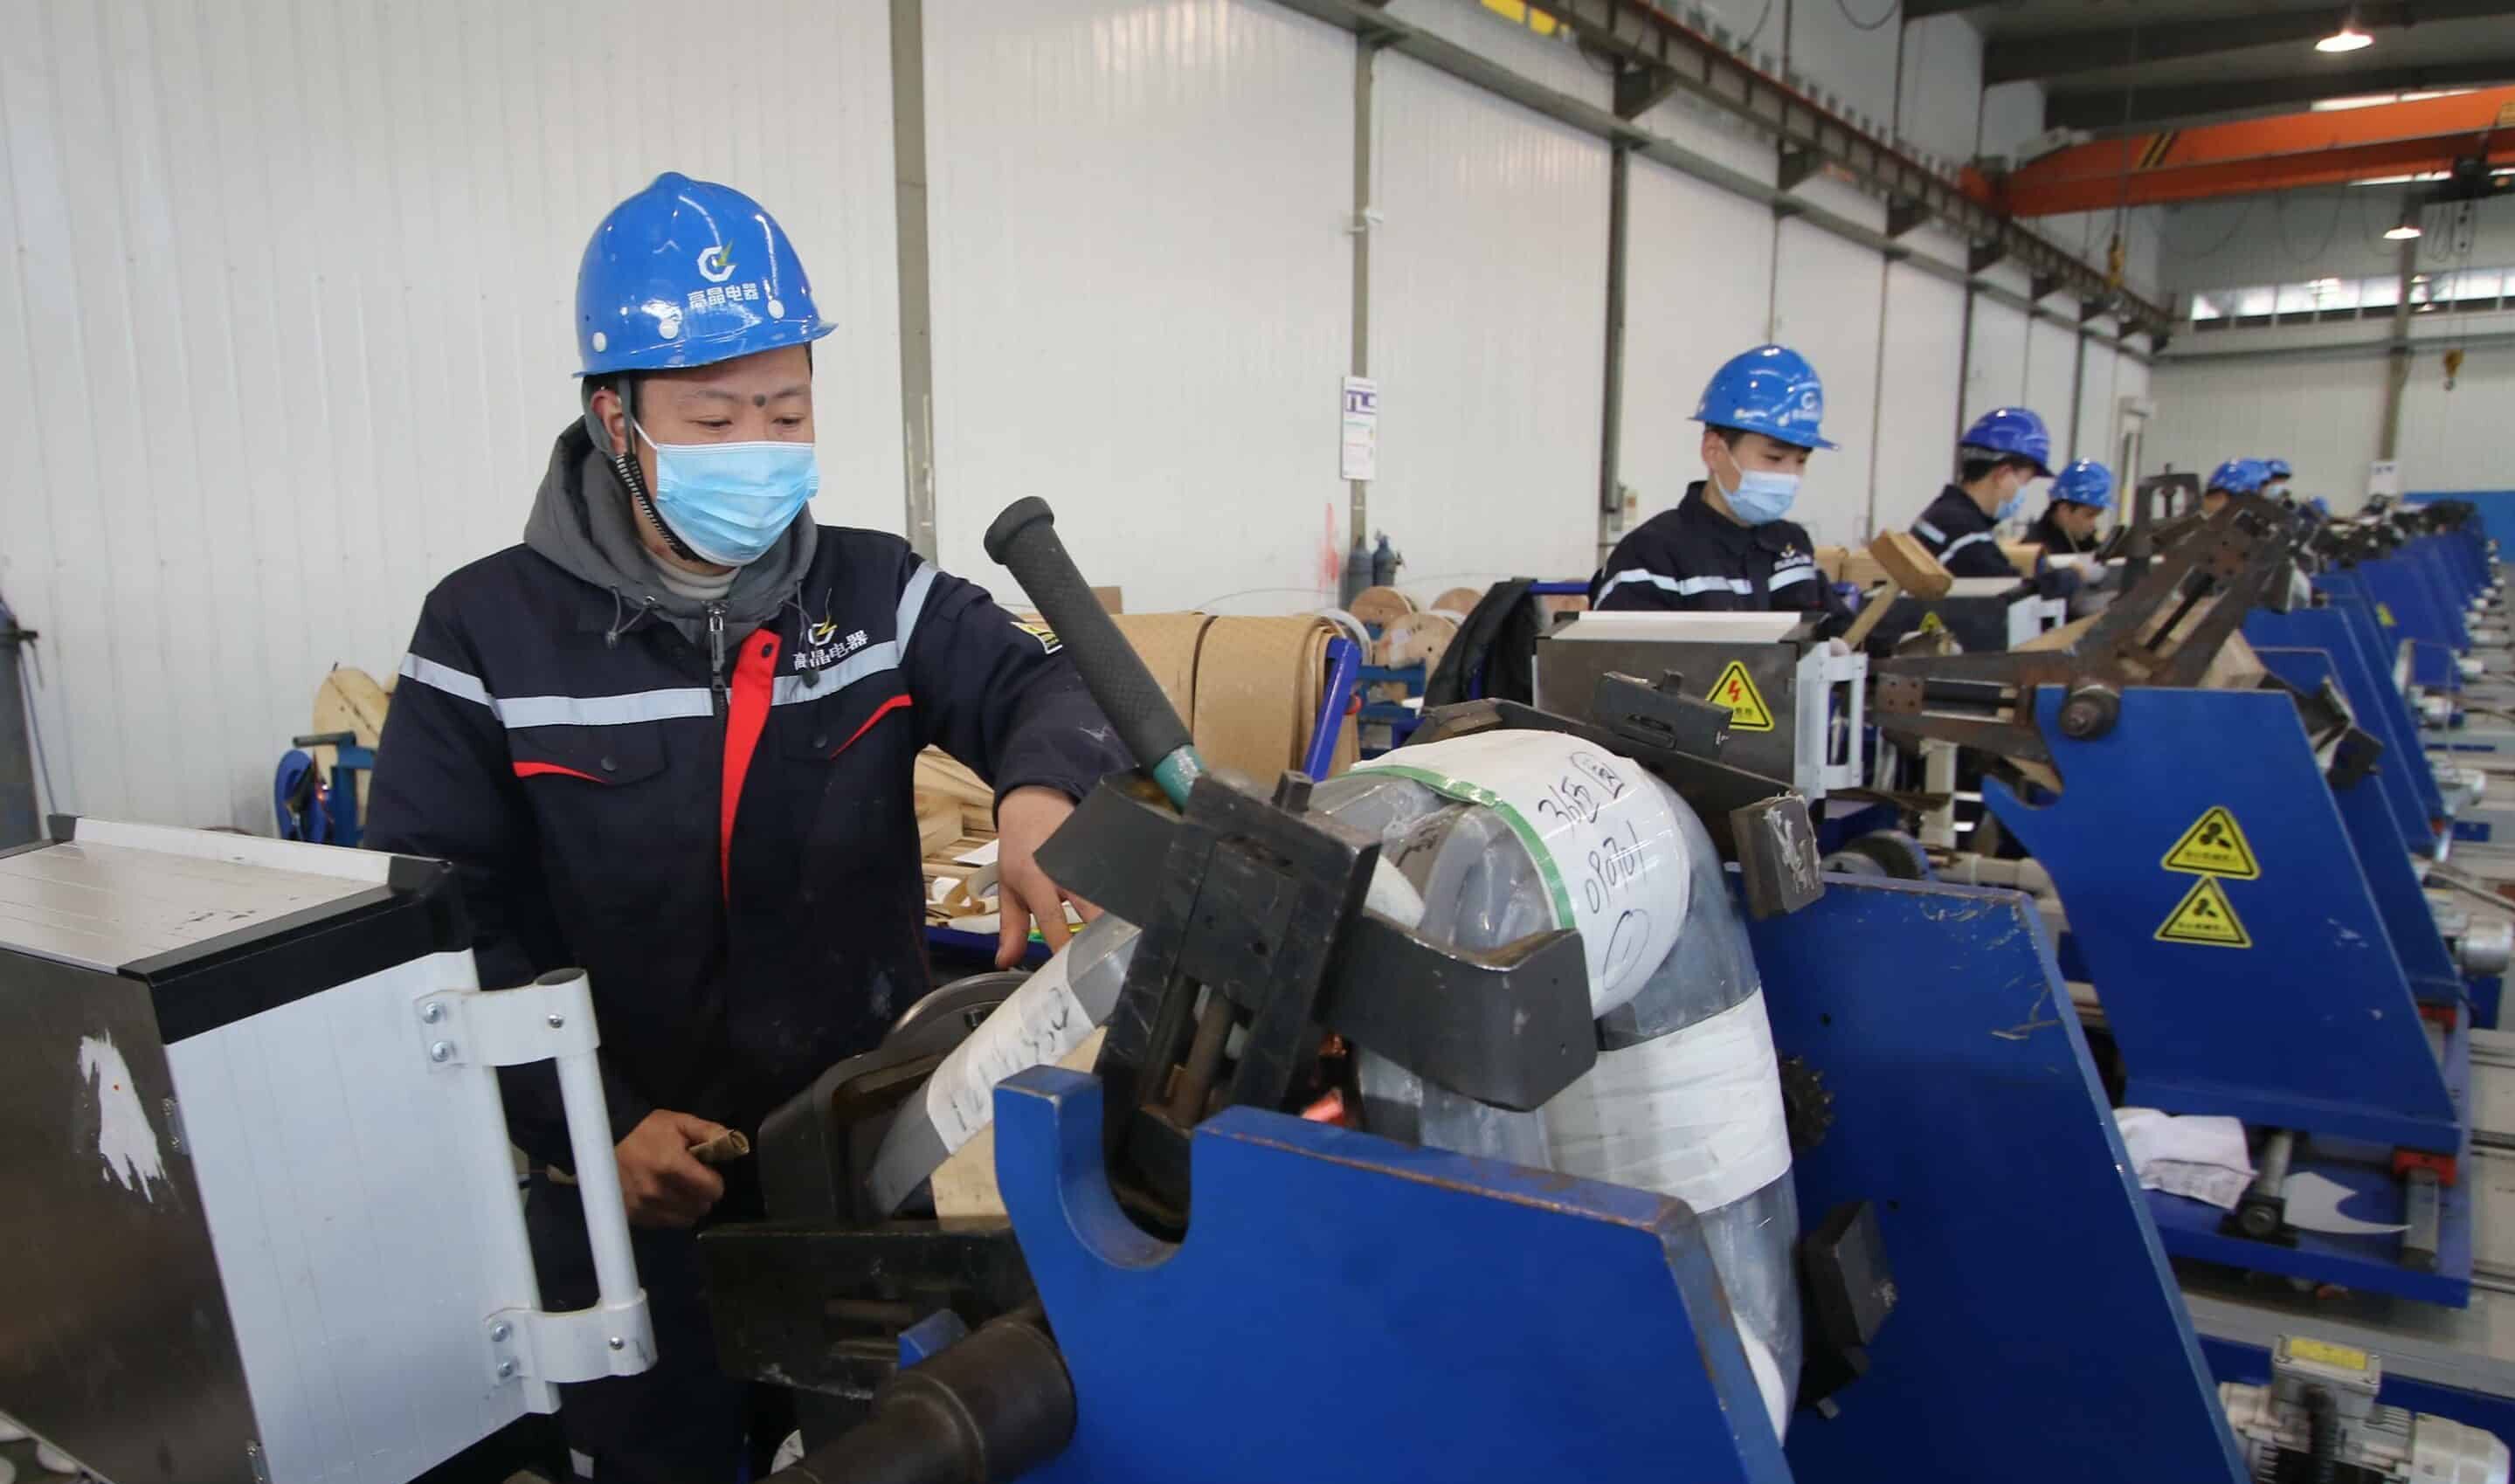 HANDAN, CHINA - JANUARY 3, 2023 - Workers assemble transformers at a workshop of Hebei Gaojing Electric Equipment Co LTD in an industrial park in Handan, North China's Hebei province, Jan 3, 2023. (Photo by CFOTO/Sipa USA)/43638635//2301031150